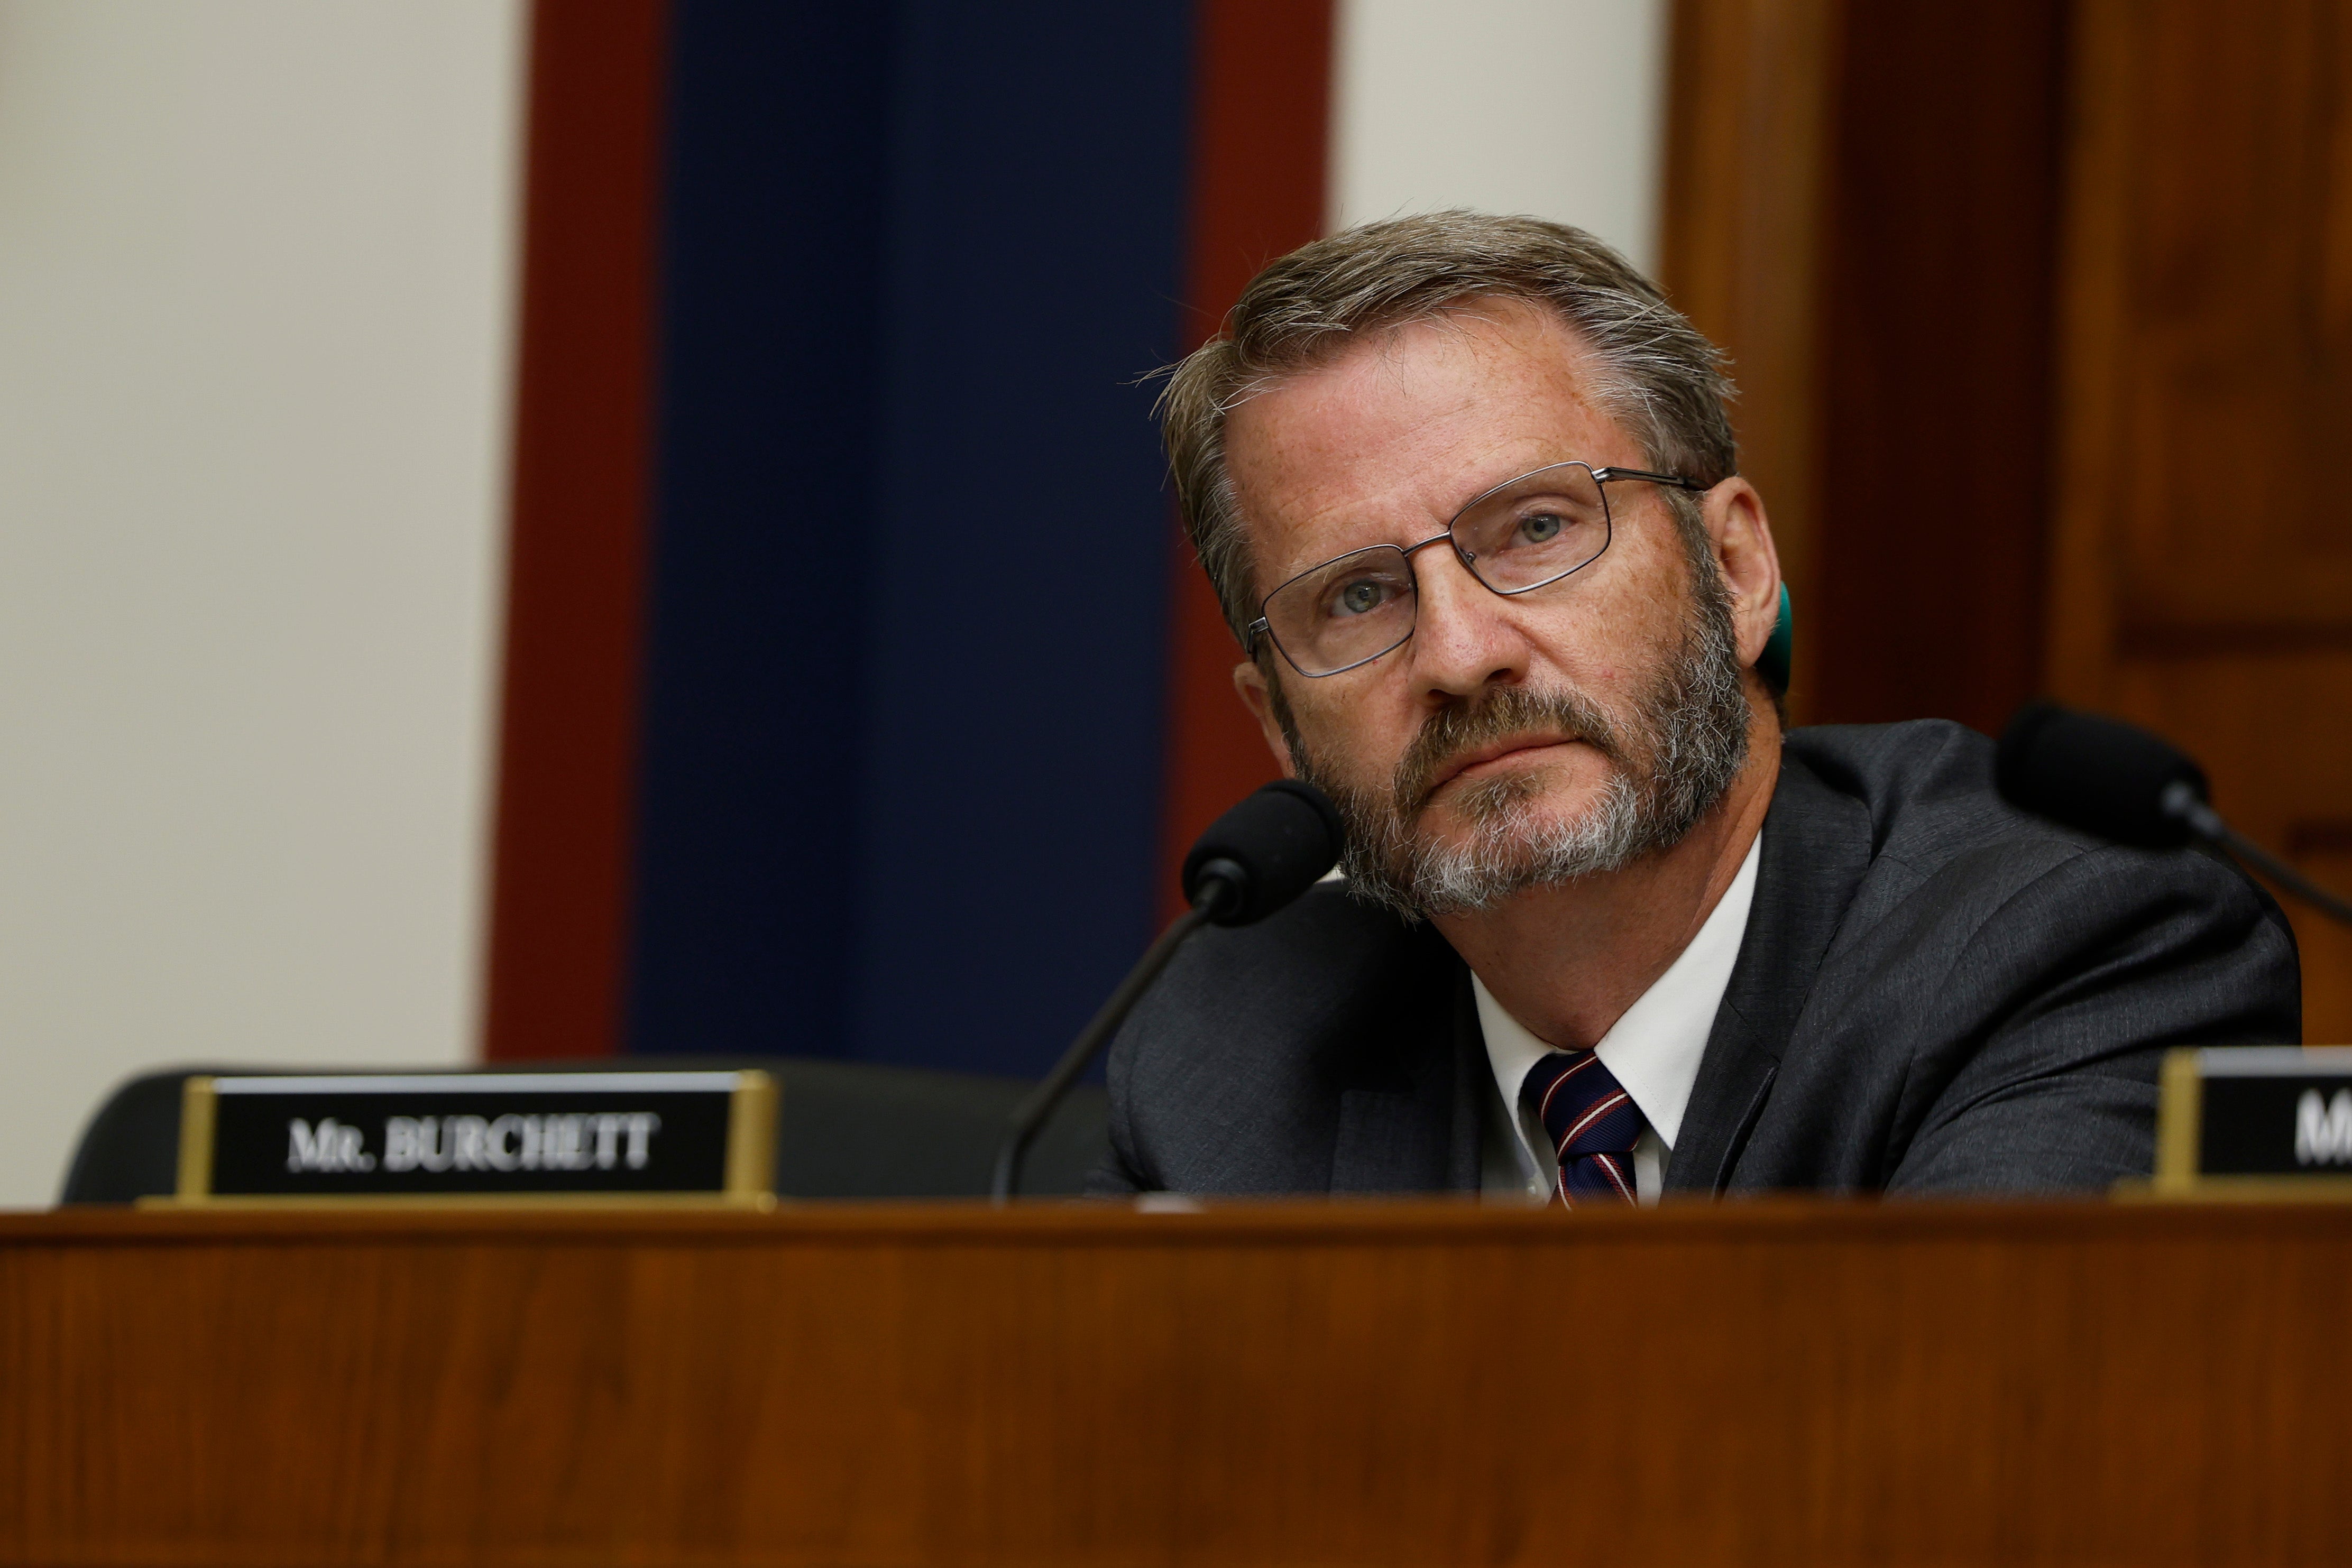 Rep. Tim Burchett, R-Tenn., attends a hearing with the House Subcommittee on Railroads, Pipelines, and Hazardous Materials in the Rayburn House Office Building on June 6, 2023 in Washington, D.C.